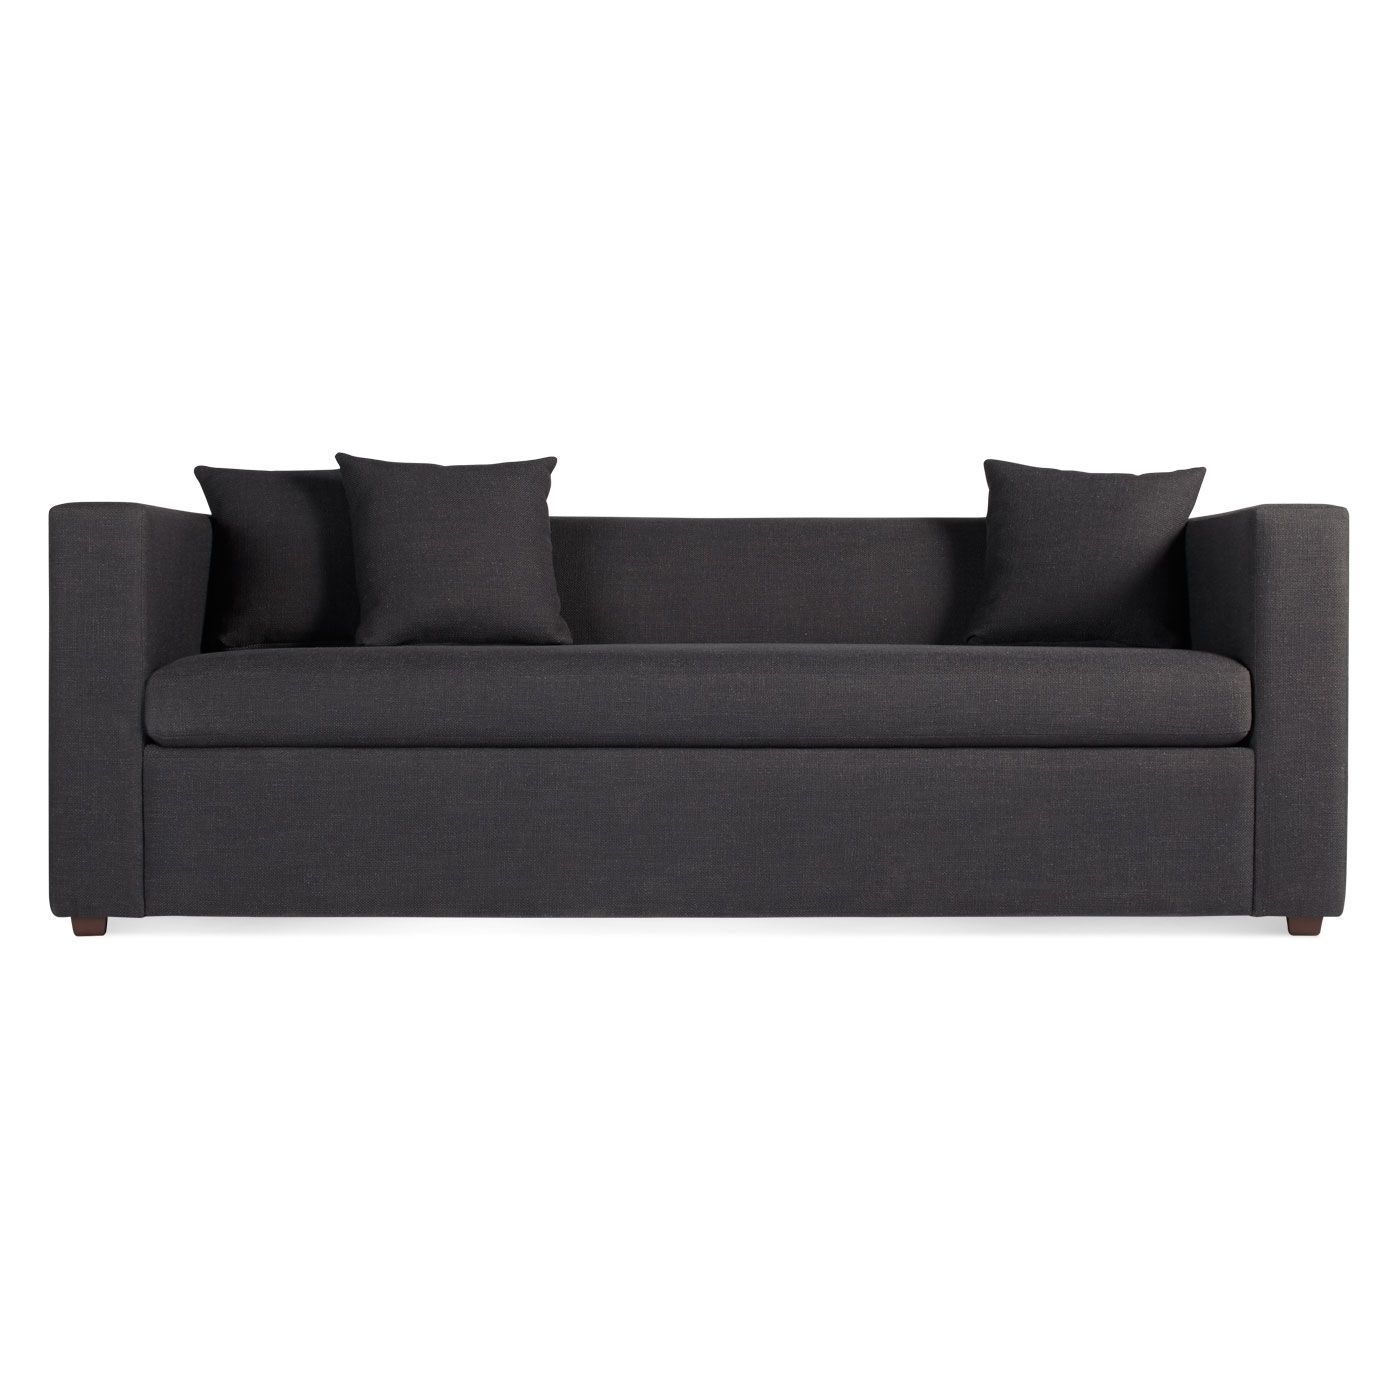 Furniture : Mattress Firm 77057 Sleeper Sectional Sofa For Small Throughout Tuscaloosa Sectional Sofas (Photo 10 of 10)